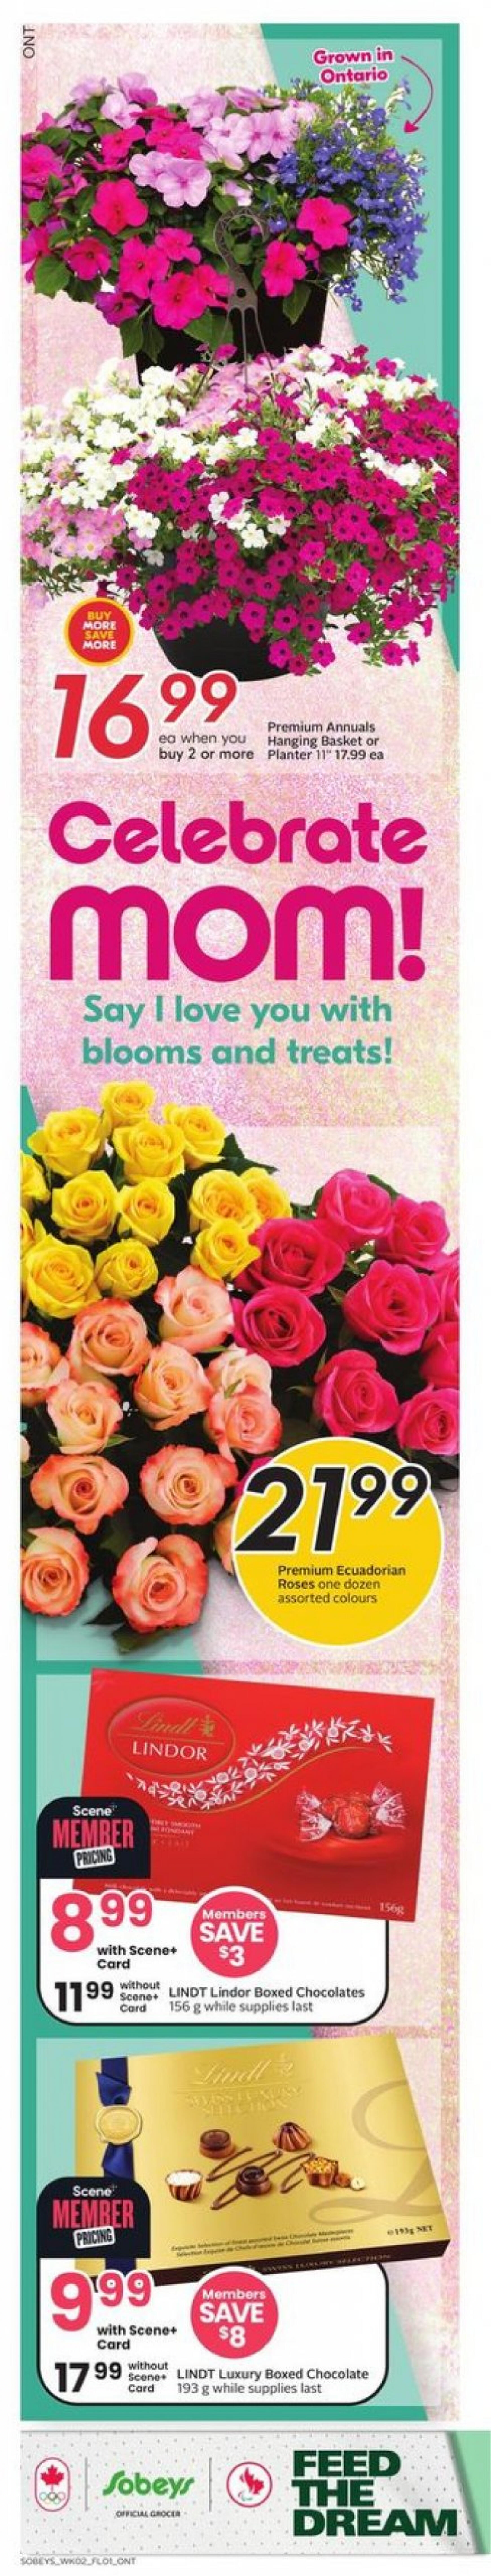 sobeys - Sobeys - Weekly Flyer - Ontario flyer current 09.05. - 15.05. - page: 2